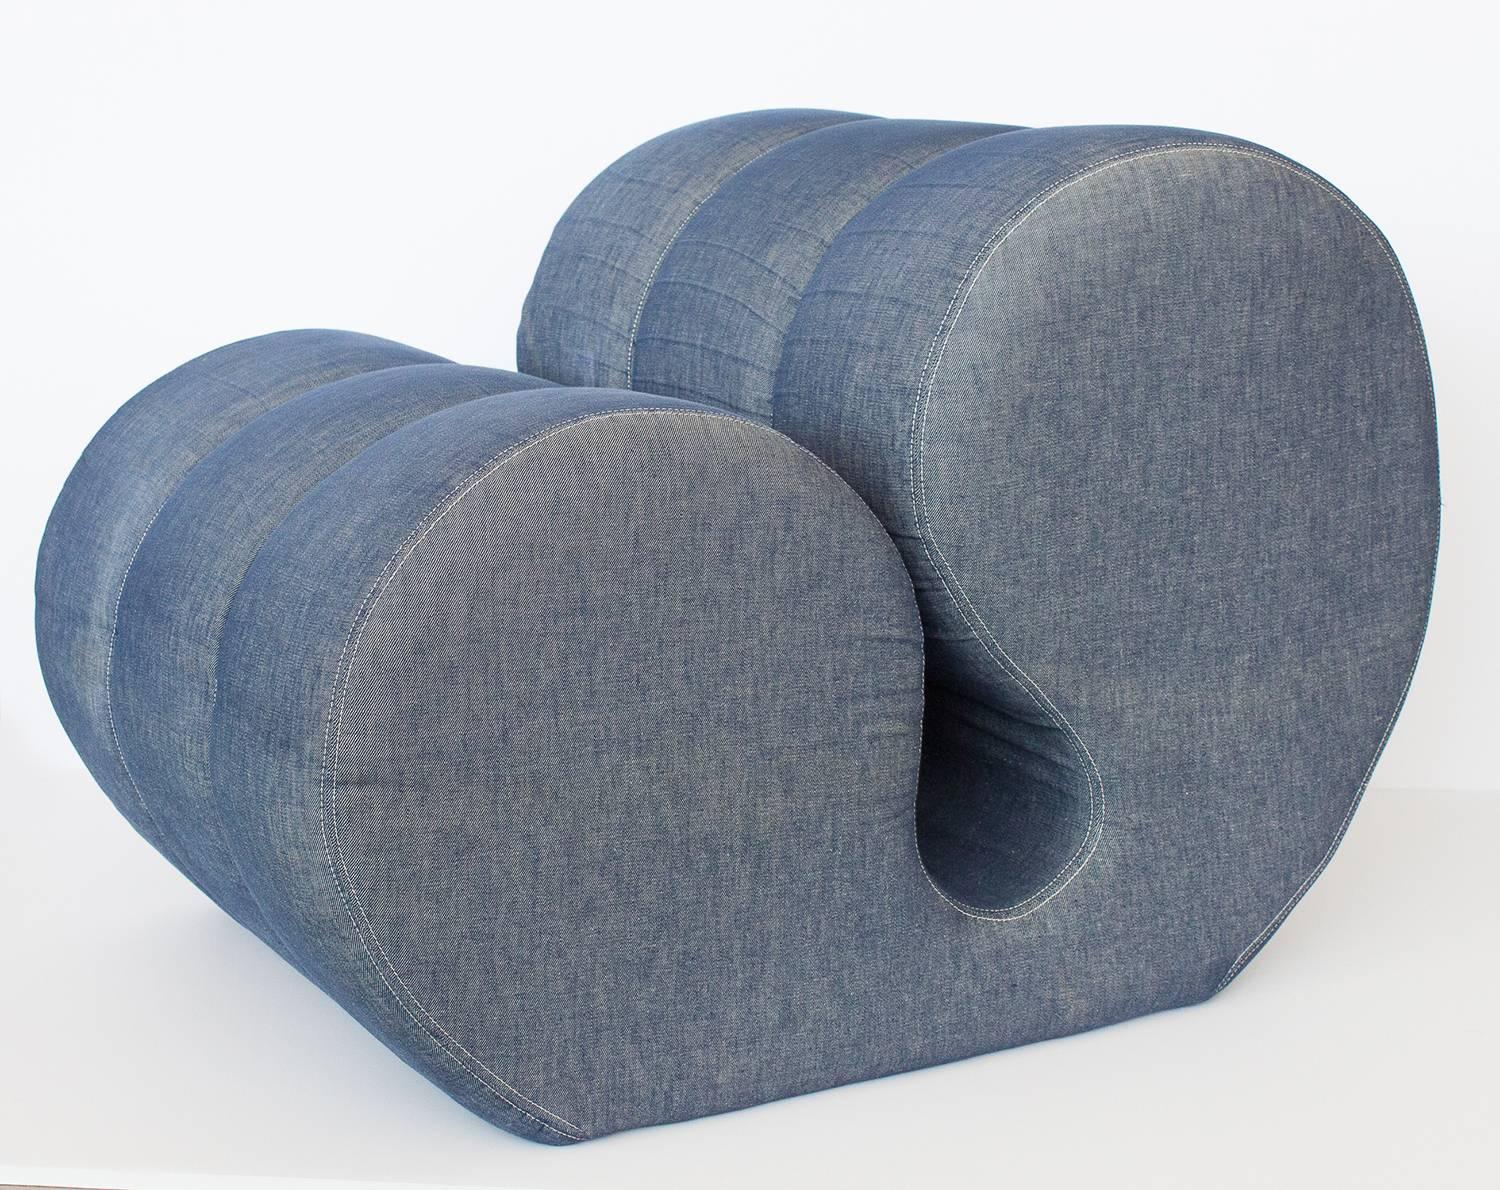 1970s sculptural denim lounge chair by Overman USA.
 